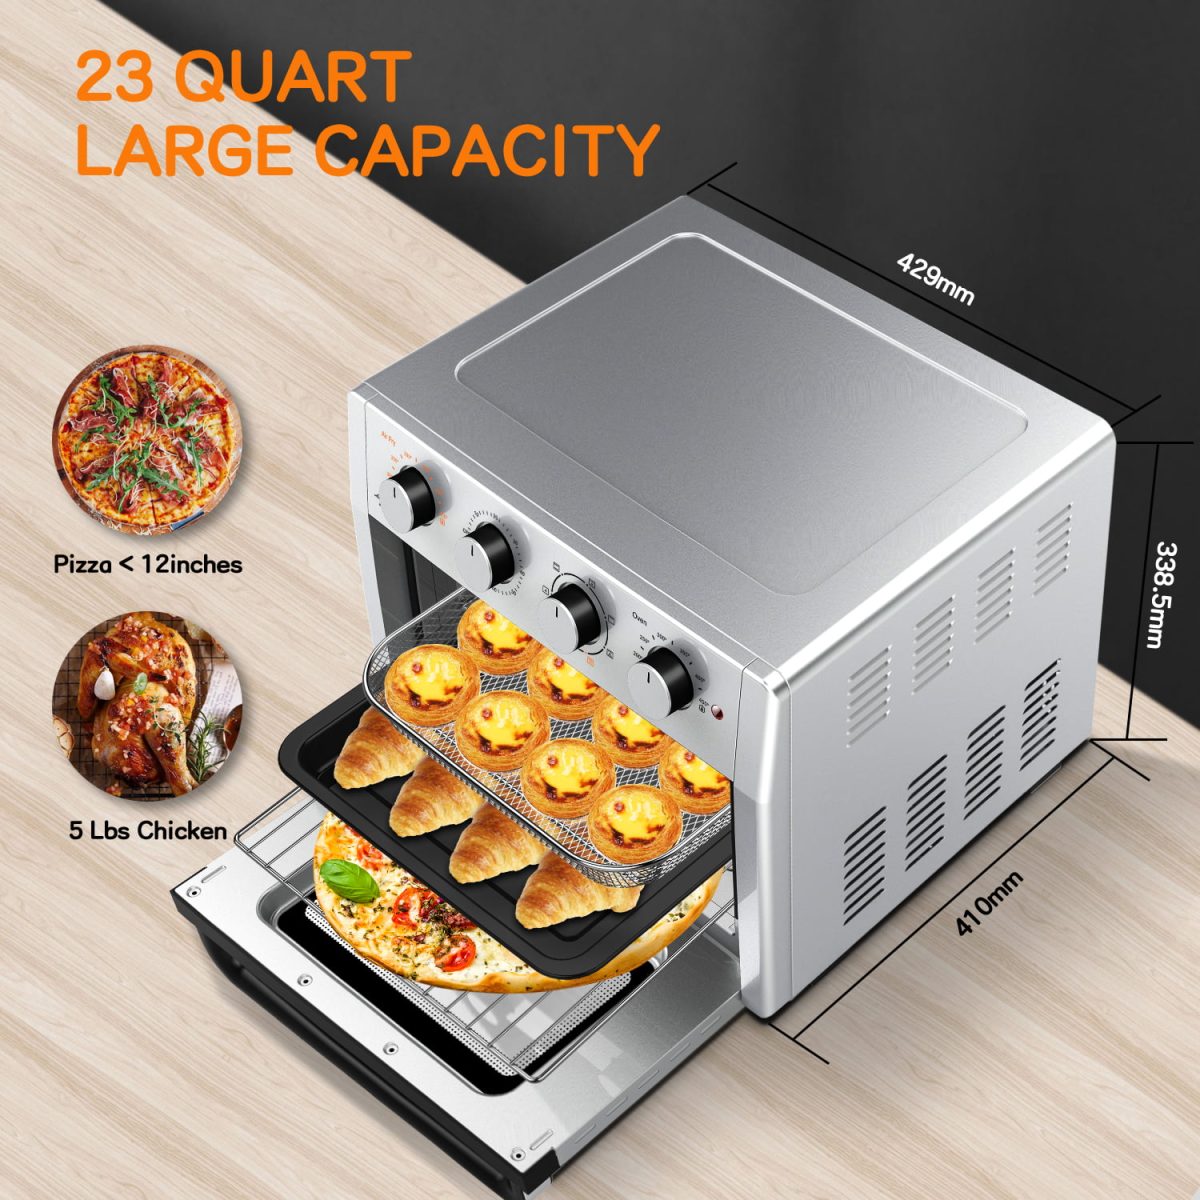 https://themarketdepot.com/wp-content/uploads/2023/01/24-Qt-Air-Fryer-Toaster-Oven-7-In-1-Convection-Oven-with-Air-Fry-Roast-Toast-Broil-Bake-Function-Rotisserie-Dehydrator-for-Kitchen-Countertop-Appliances-for-Cooking-Chicken-Steak-Pizza-4-1200x1200.jpeg